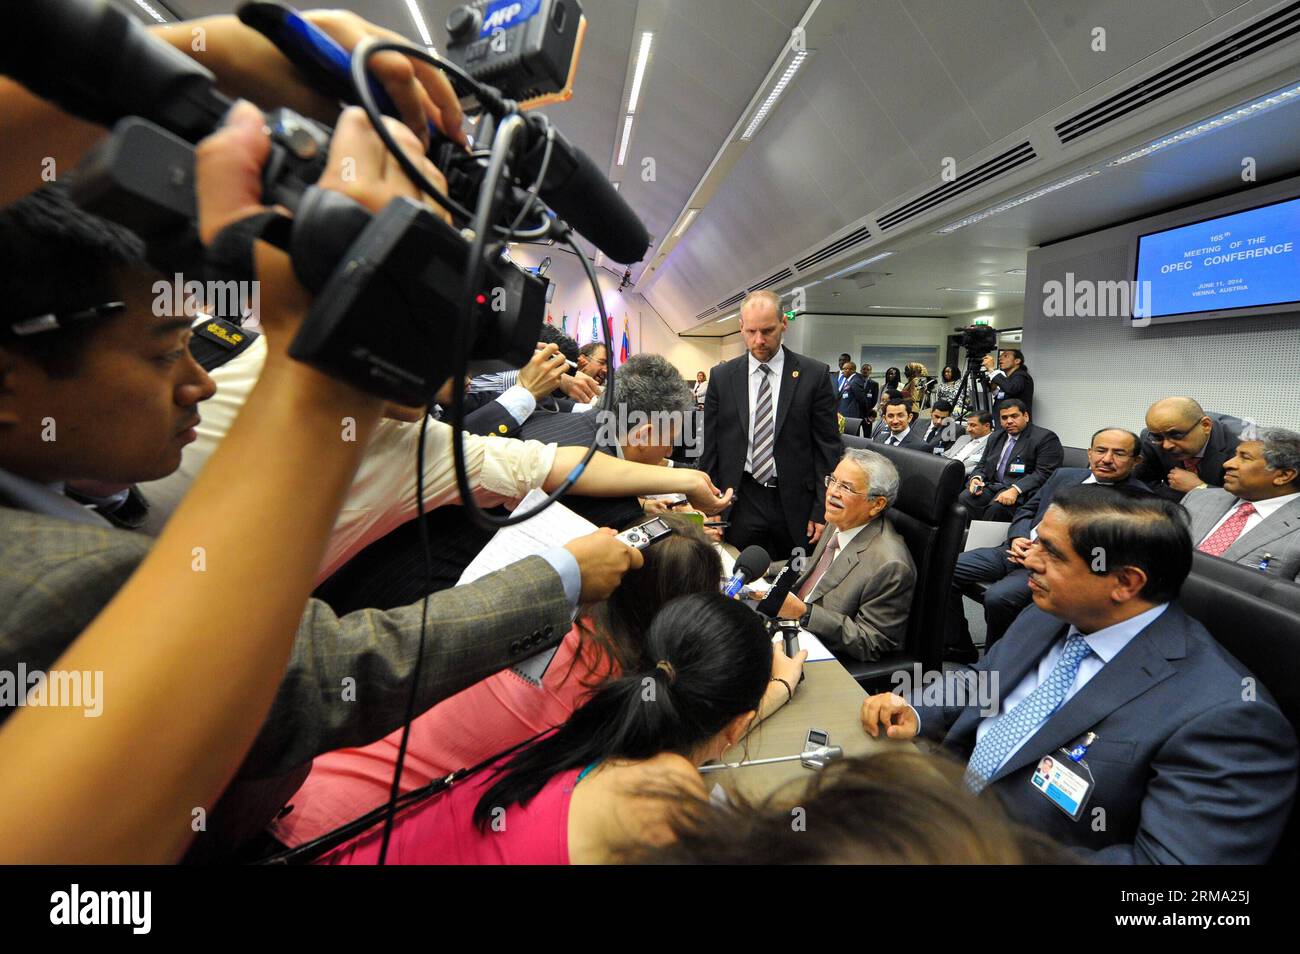 (140611) -- VIENNA, June 11, 2014 (Xinhua) -- Saudi Arabia s Minister of Petroleum and Mineral Resources Ali Bin Ibrahim al-Naimi (C) speaks to the media prior to the start of the 165th ministerial meeting of the OPEC conference (Organization of the Petroleum Exporting Countries), at the headquarters in Vienna, Austria, on June 11, 2014. (Xinhua/Qian Yi) (djj) AUSTRIA-VIENNA-OPEC-MINISTERIAL MEETING PUBLICATIONxNOTxINxCHN   Vienna June 11 2014 XINHUA Saudi Arabia S Ministers of Petroleum and Mineral Resources Ali am Ibrahim Al Naimi C Speaks to The Media Prior to The Start of The  Ministerial Stock Photo